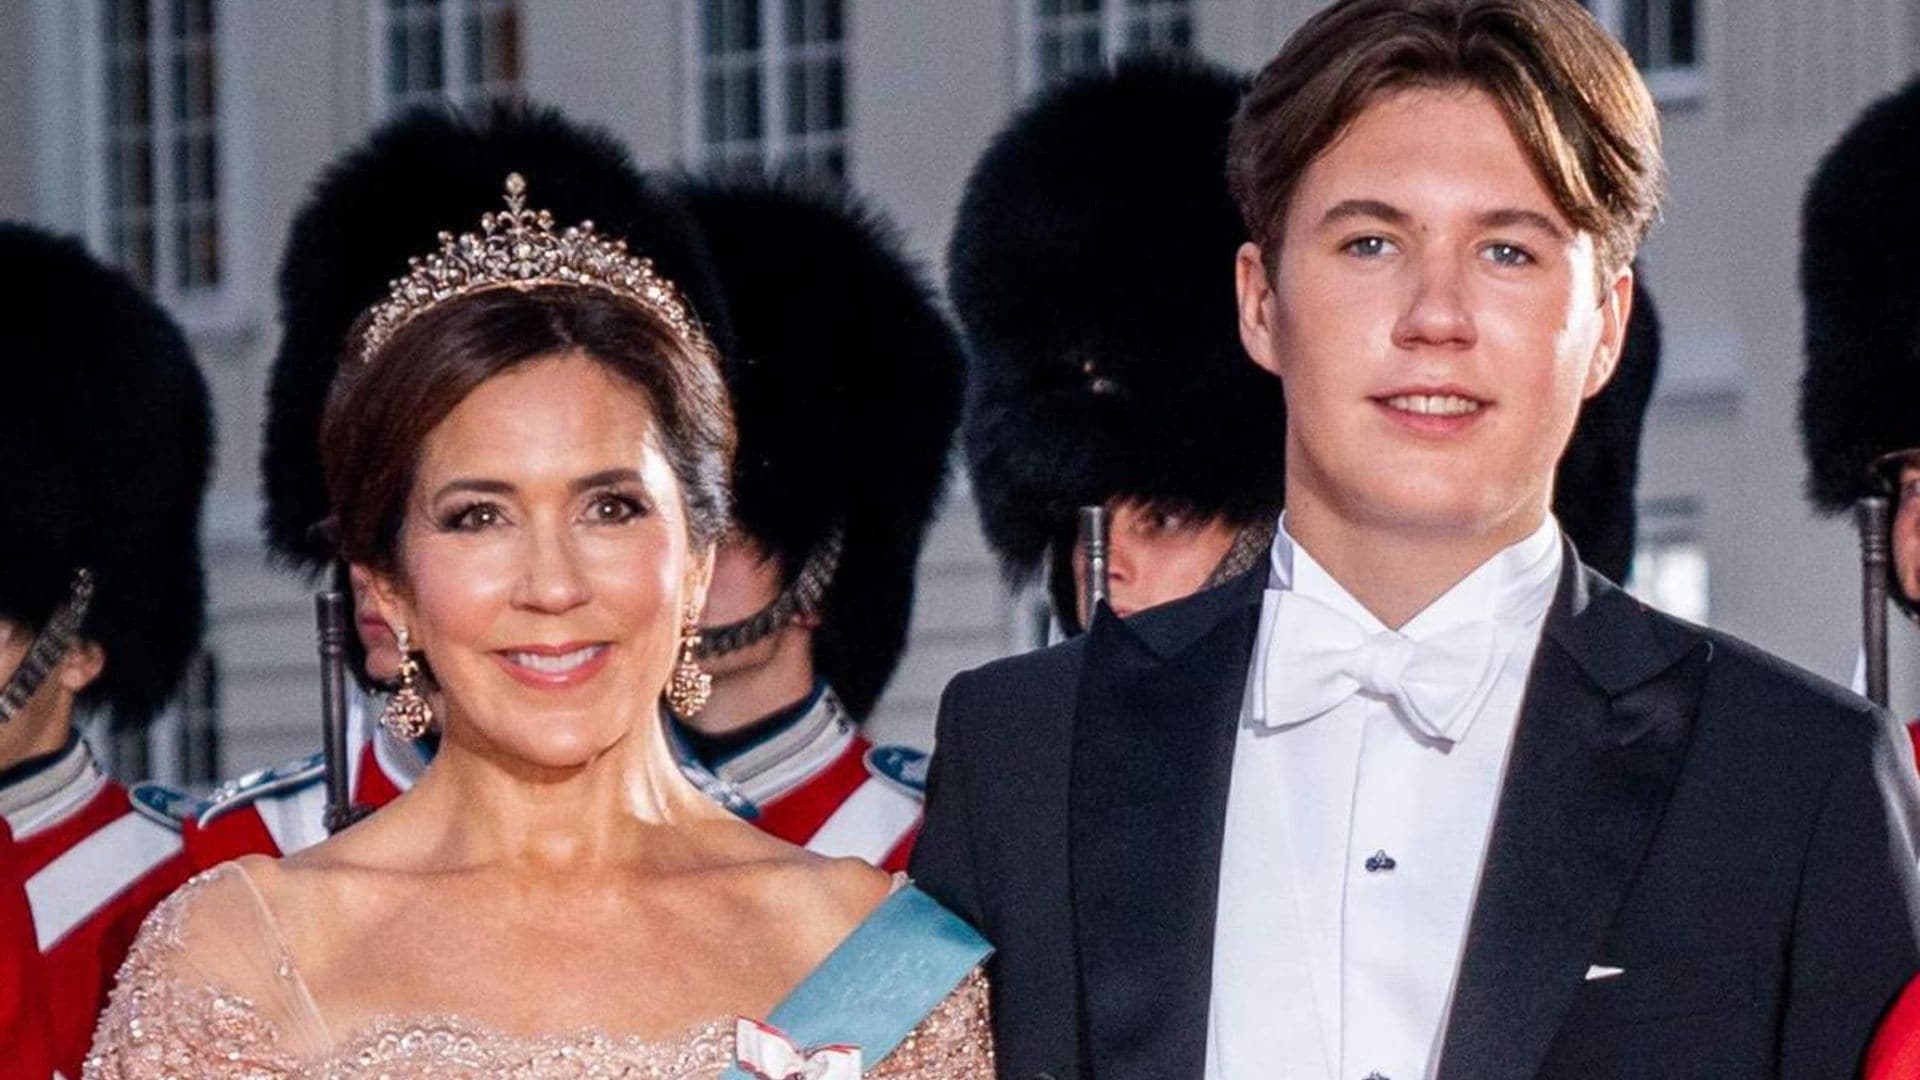 Crown Princess Mary’s son named godfather of royal baby